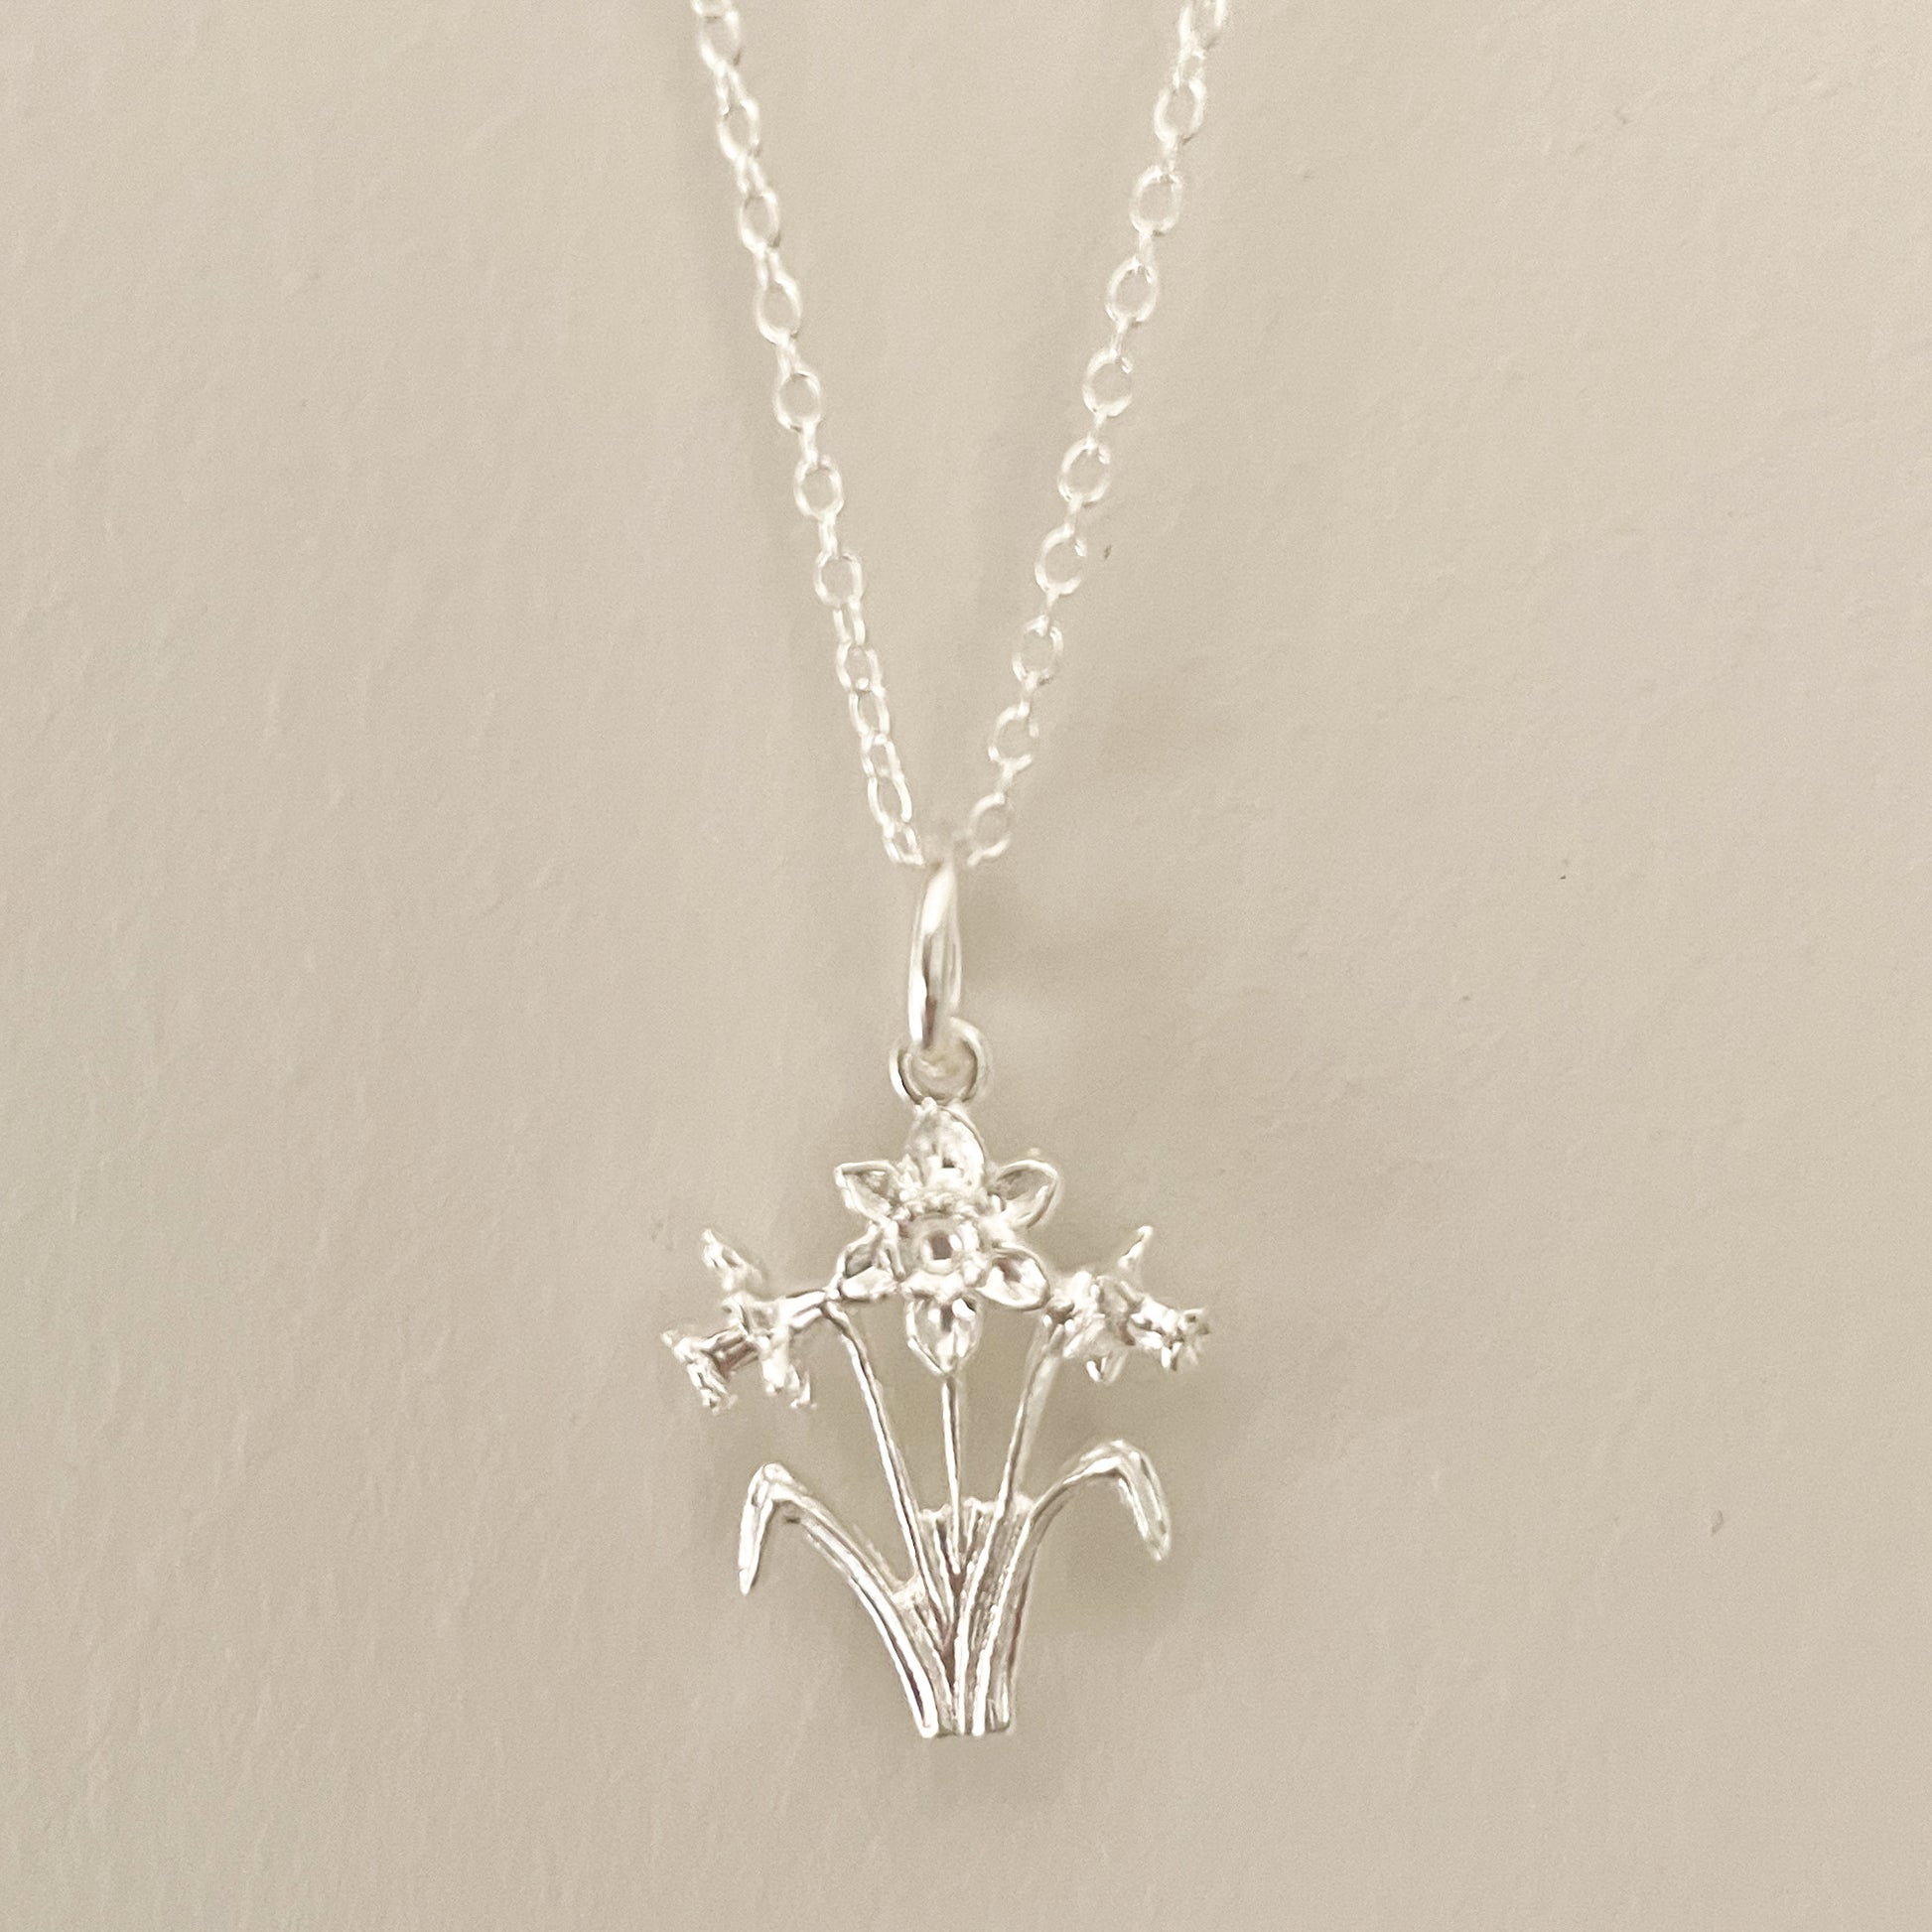 Necklace - Sterling Silver - Welsh Daffodils - 16" Chain